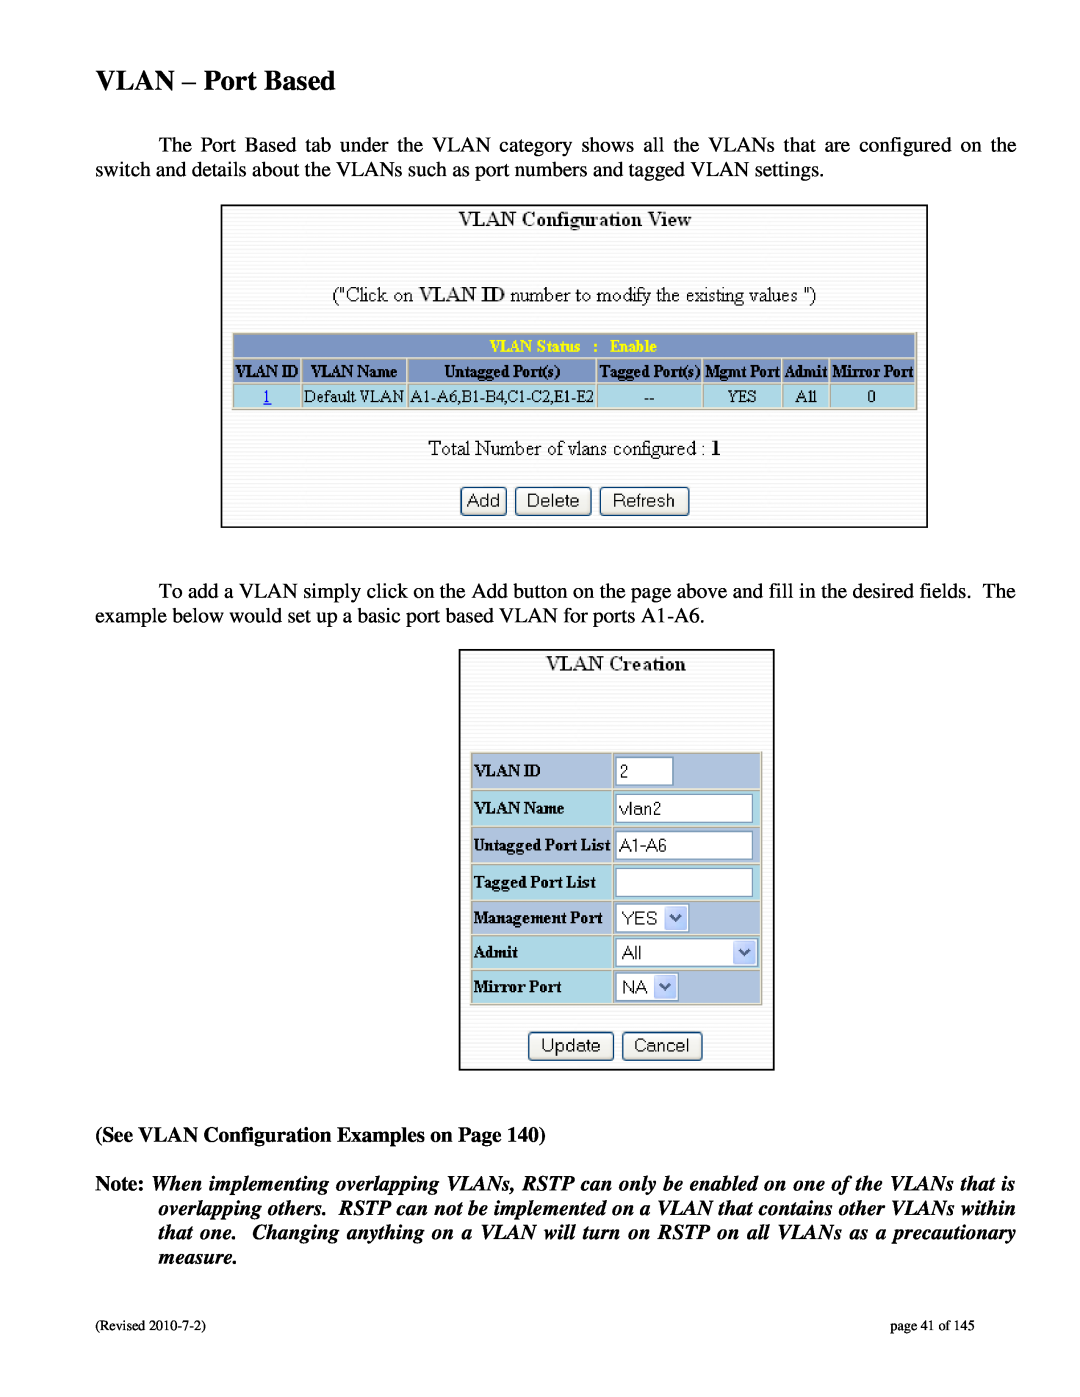 N-Tron 9000 user manual VLAN - Port Based, See VLAN Configuration Examples on Page 